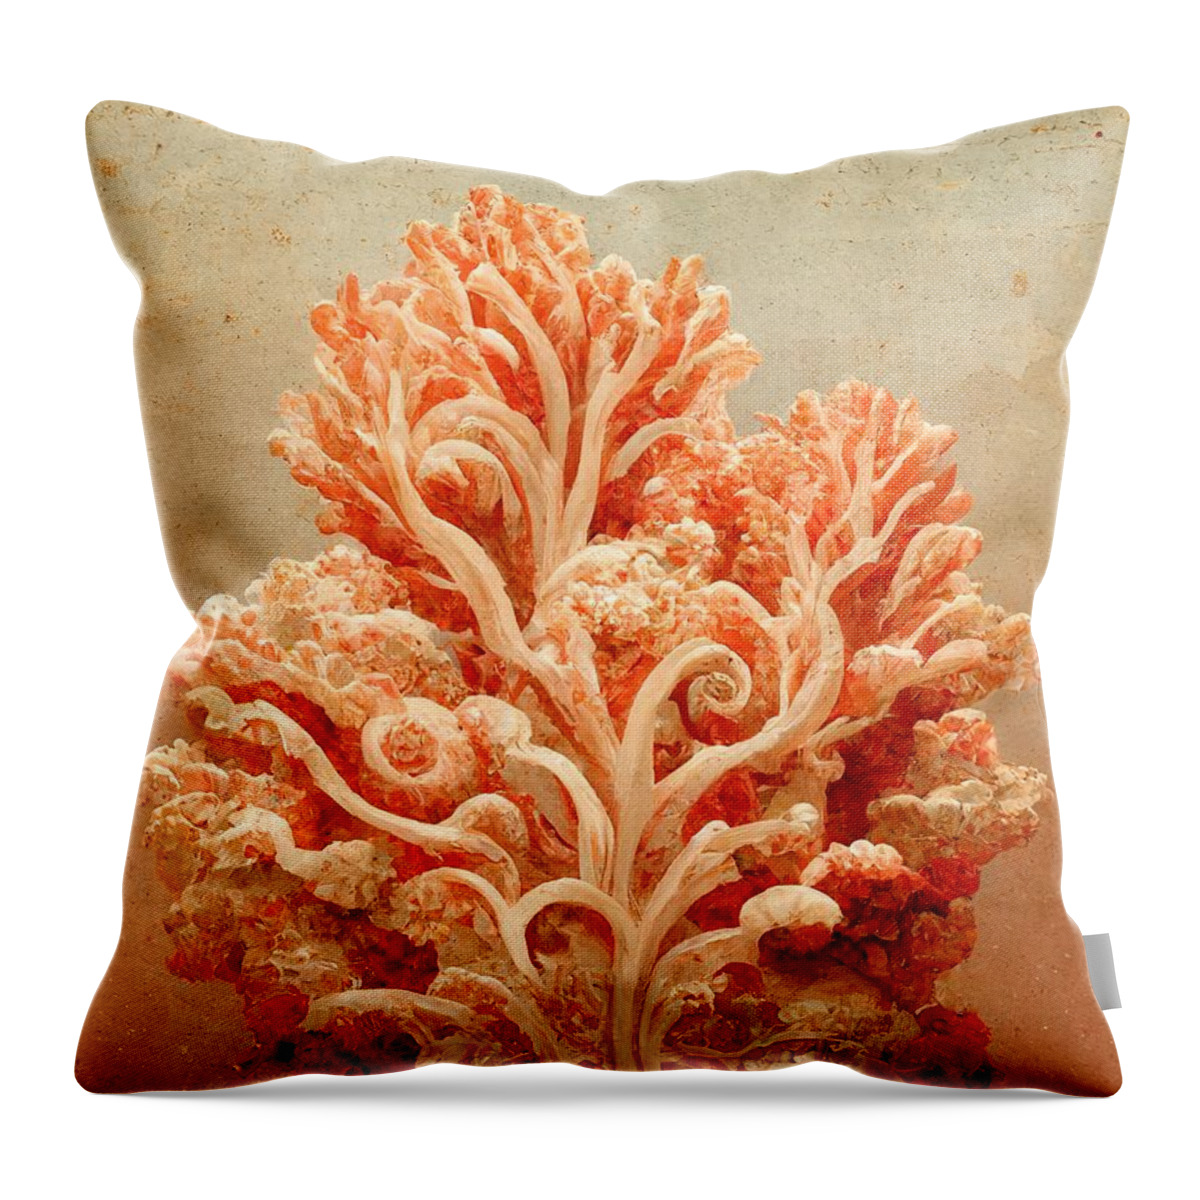 Coral Throw Pillow featuring the digital art From the Depths by Nickleen Mosher